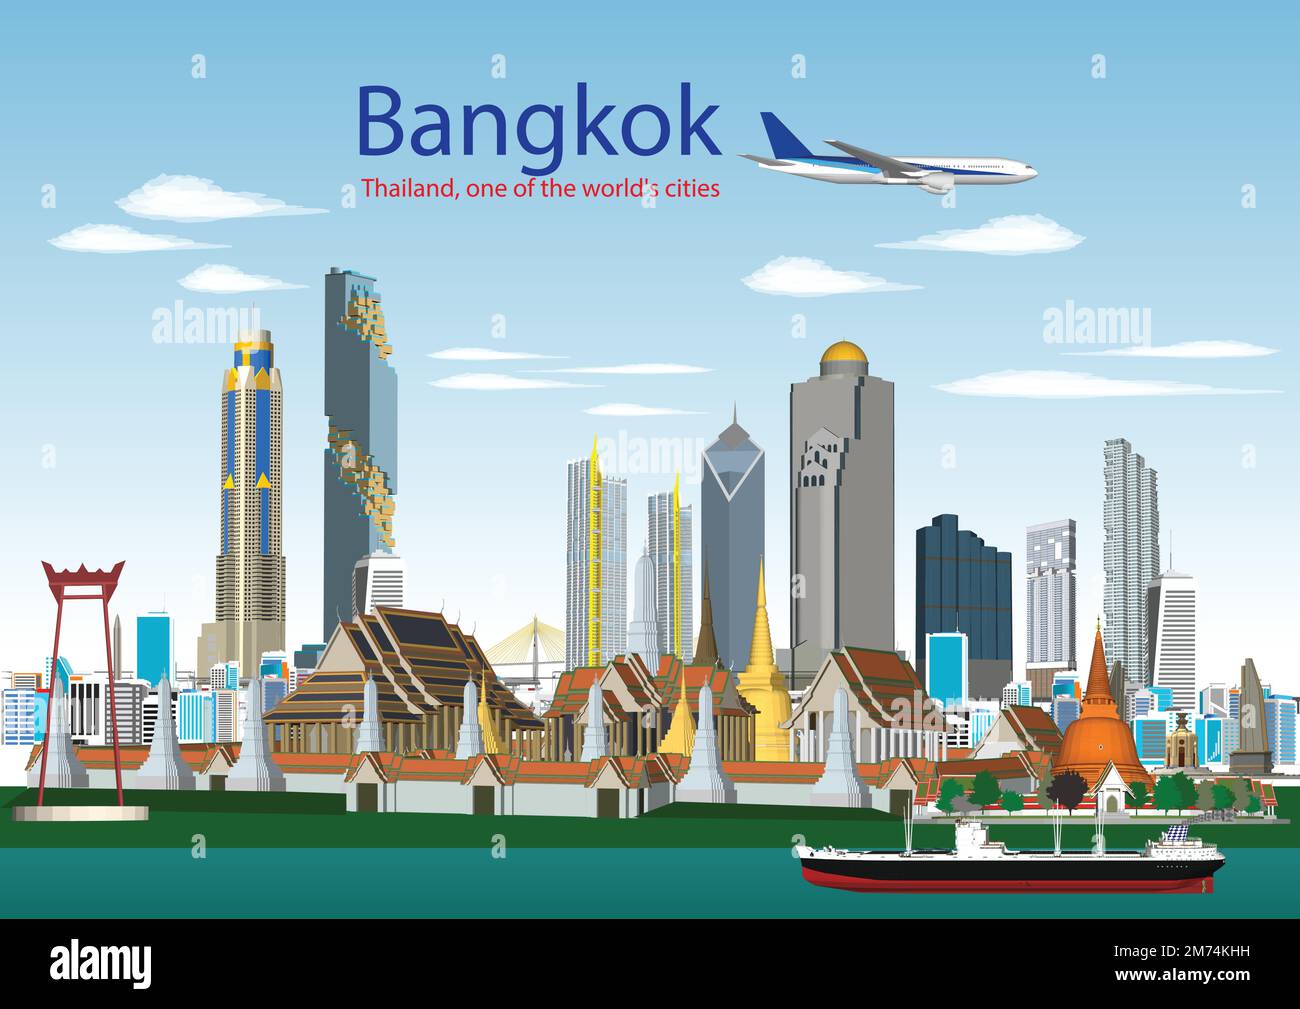 bangkok night skyline (Thailand)vector illustration business trip and tourism concept with modern buildings image for banner or website Stock Vector